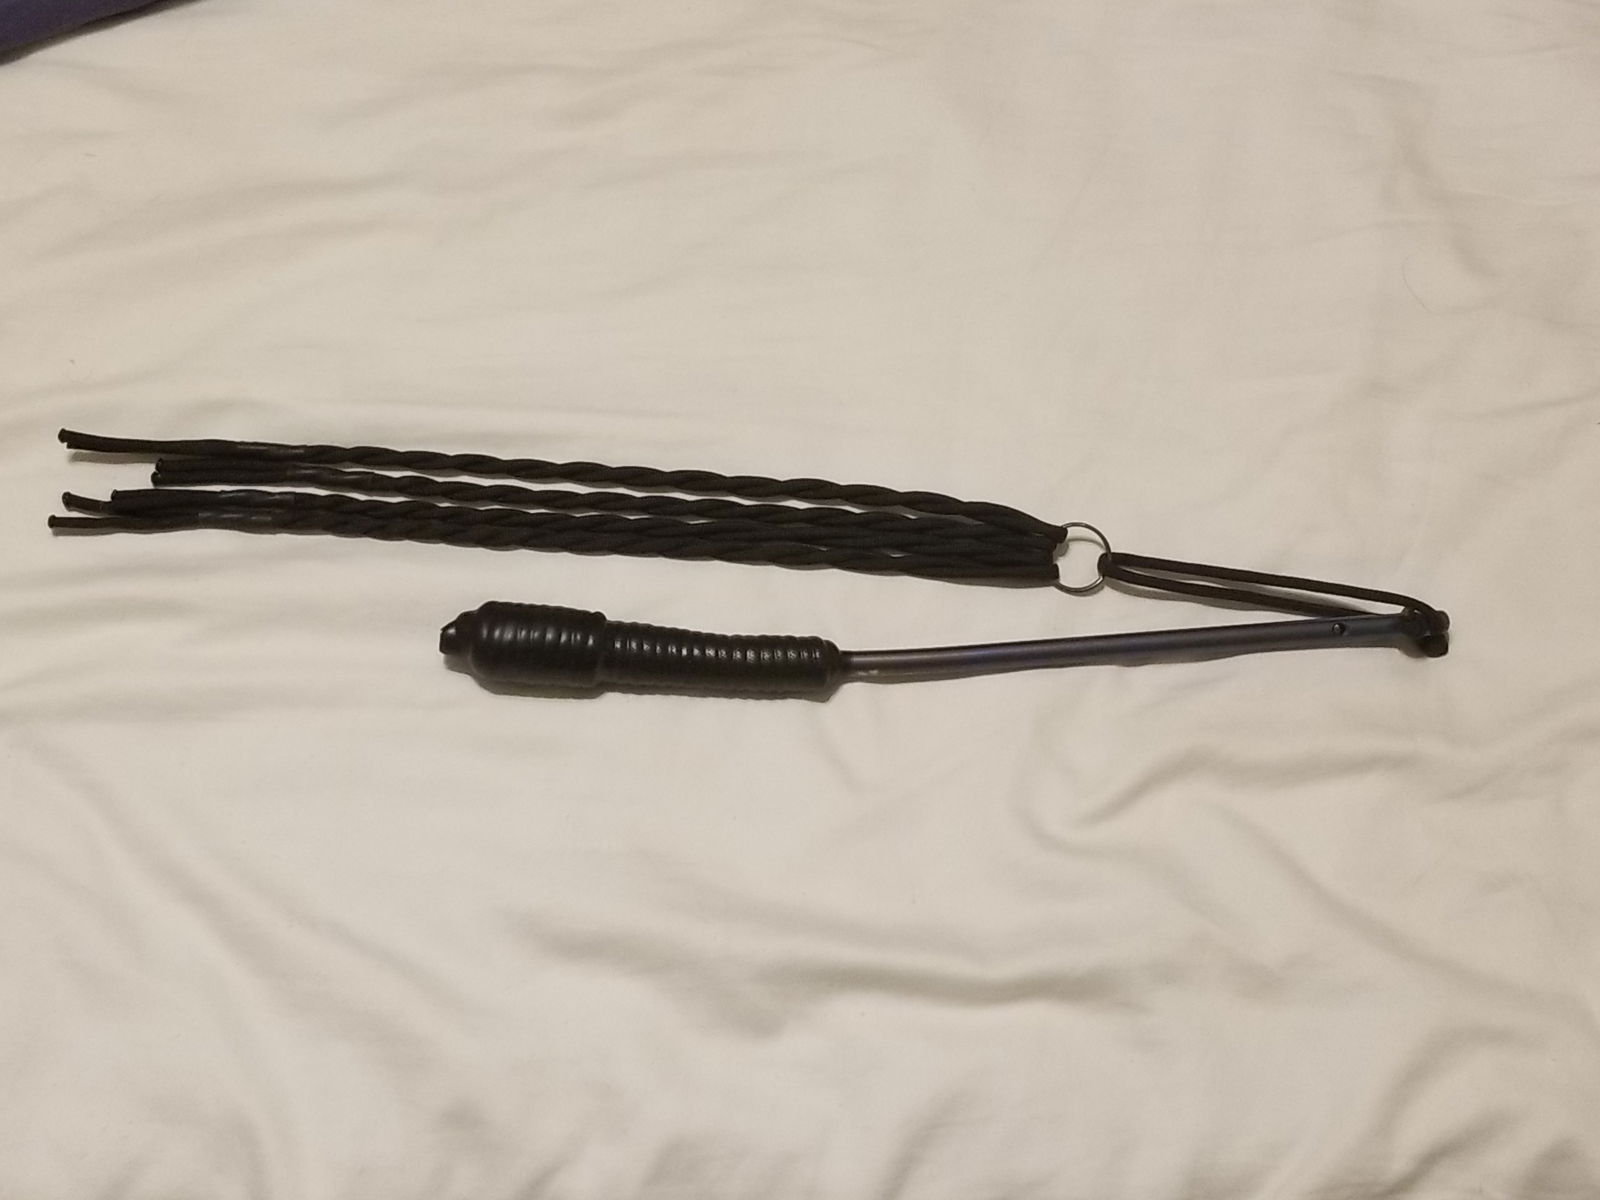 Photo by LemonadeStands with the username @LemonadeStands,  December 18, 2018 at 2:38 AM. The post is about the topic DIY and the text says 'Here's another flogger I made. A little more unique on the handle core material this time'